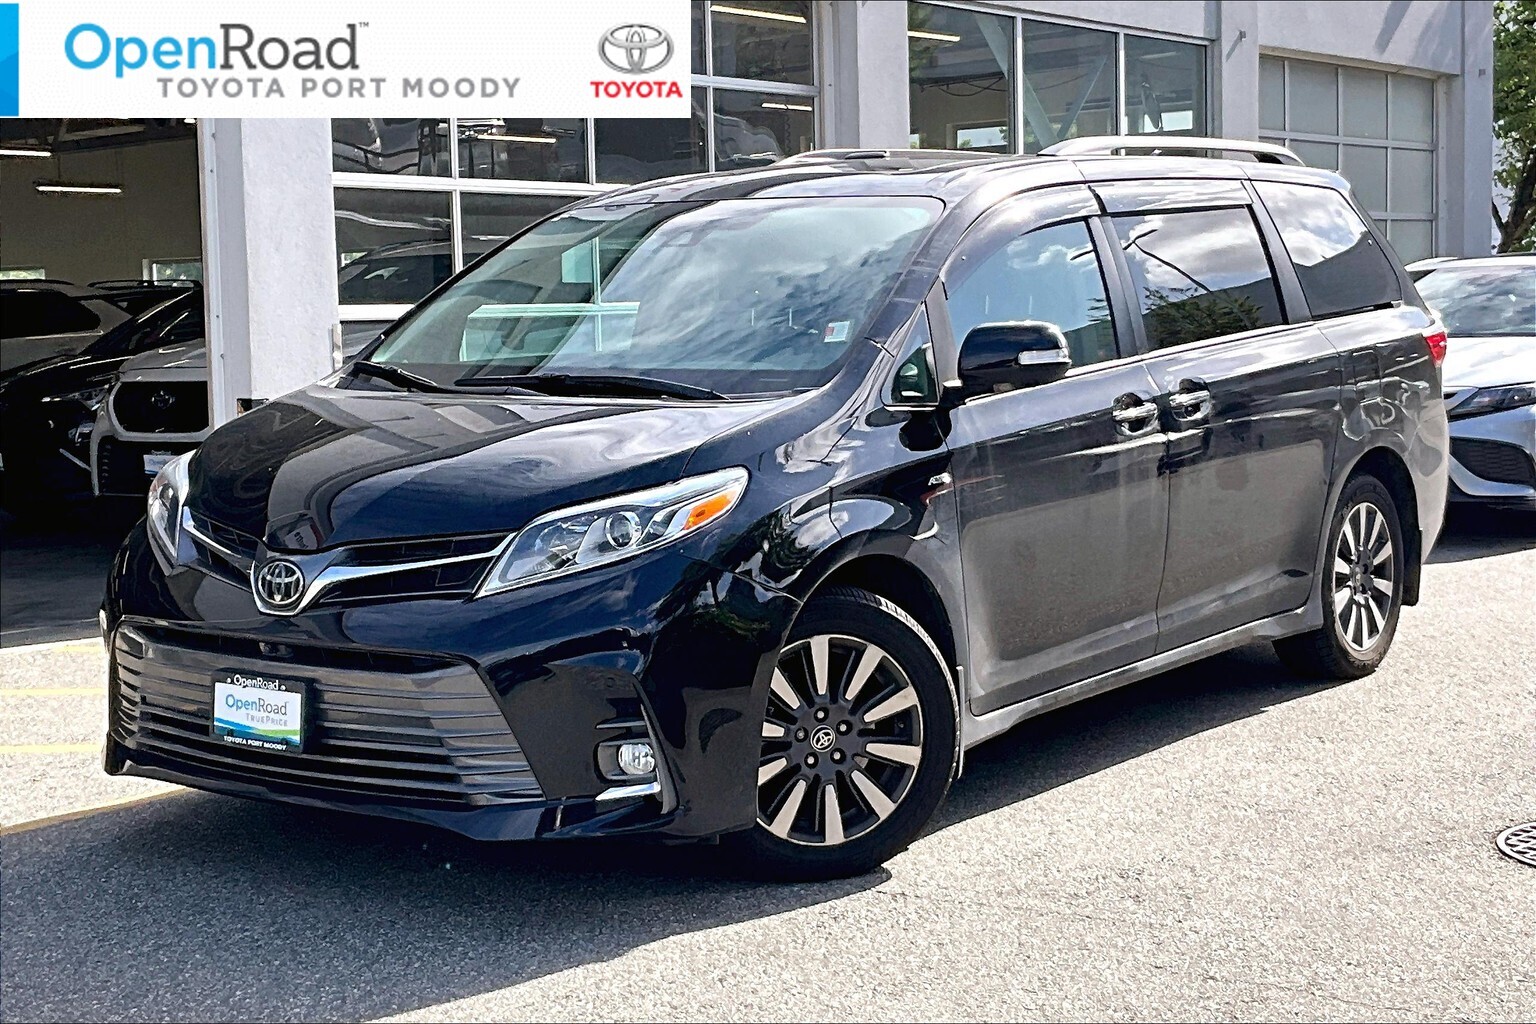 2020 Toyota Sienna XLE AWD 7-Passenger V6 |OpenRoad True Price |Local